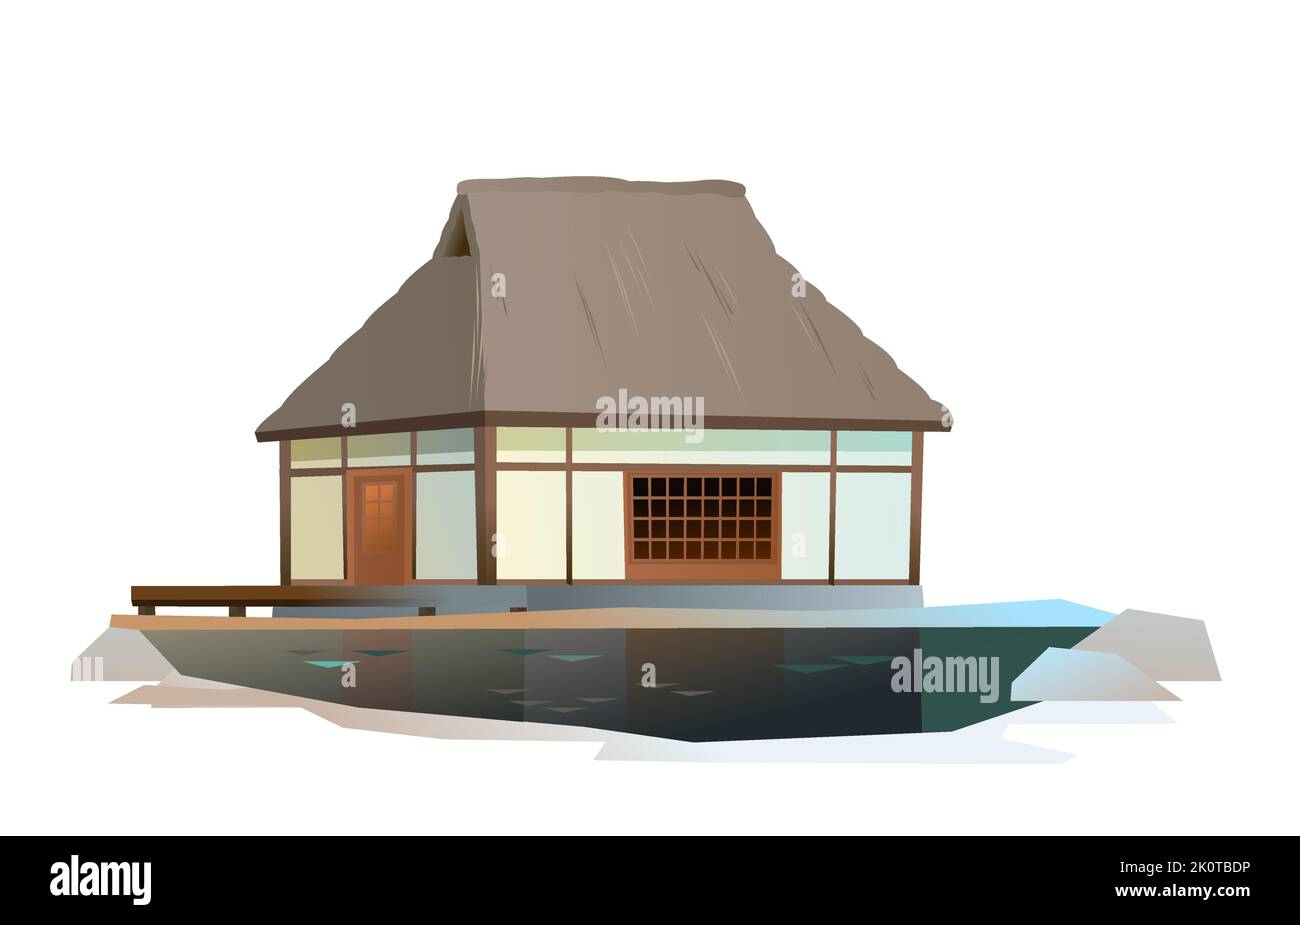 Traditional Japanese house. On bank of pond. Rural dwelling with thatched roof. illustration vector. Stock Vector